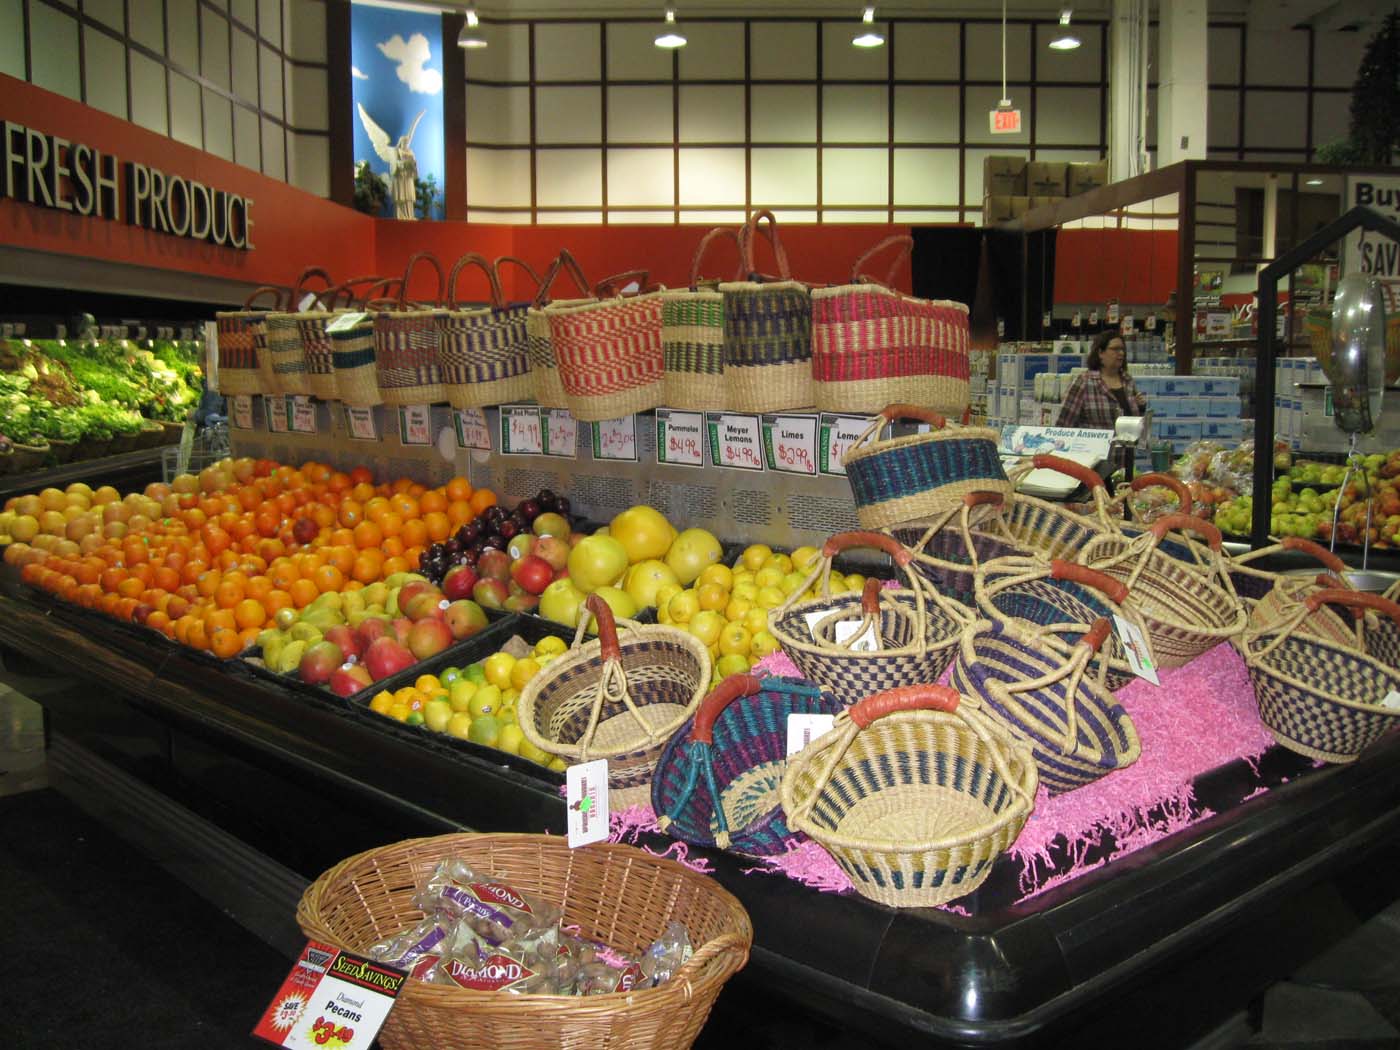 Promoting baskets around Easter and other holidays